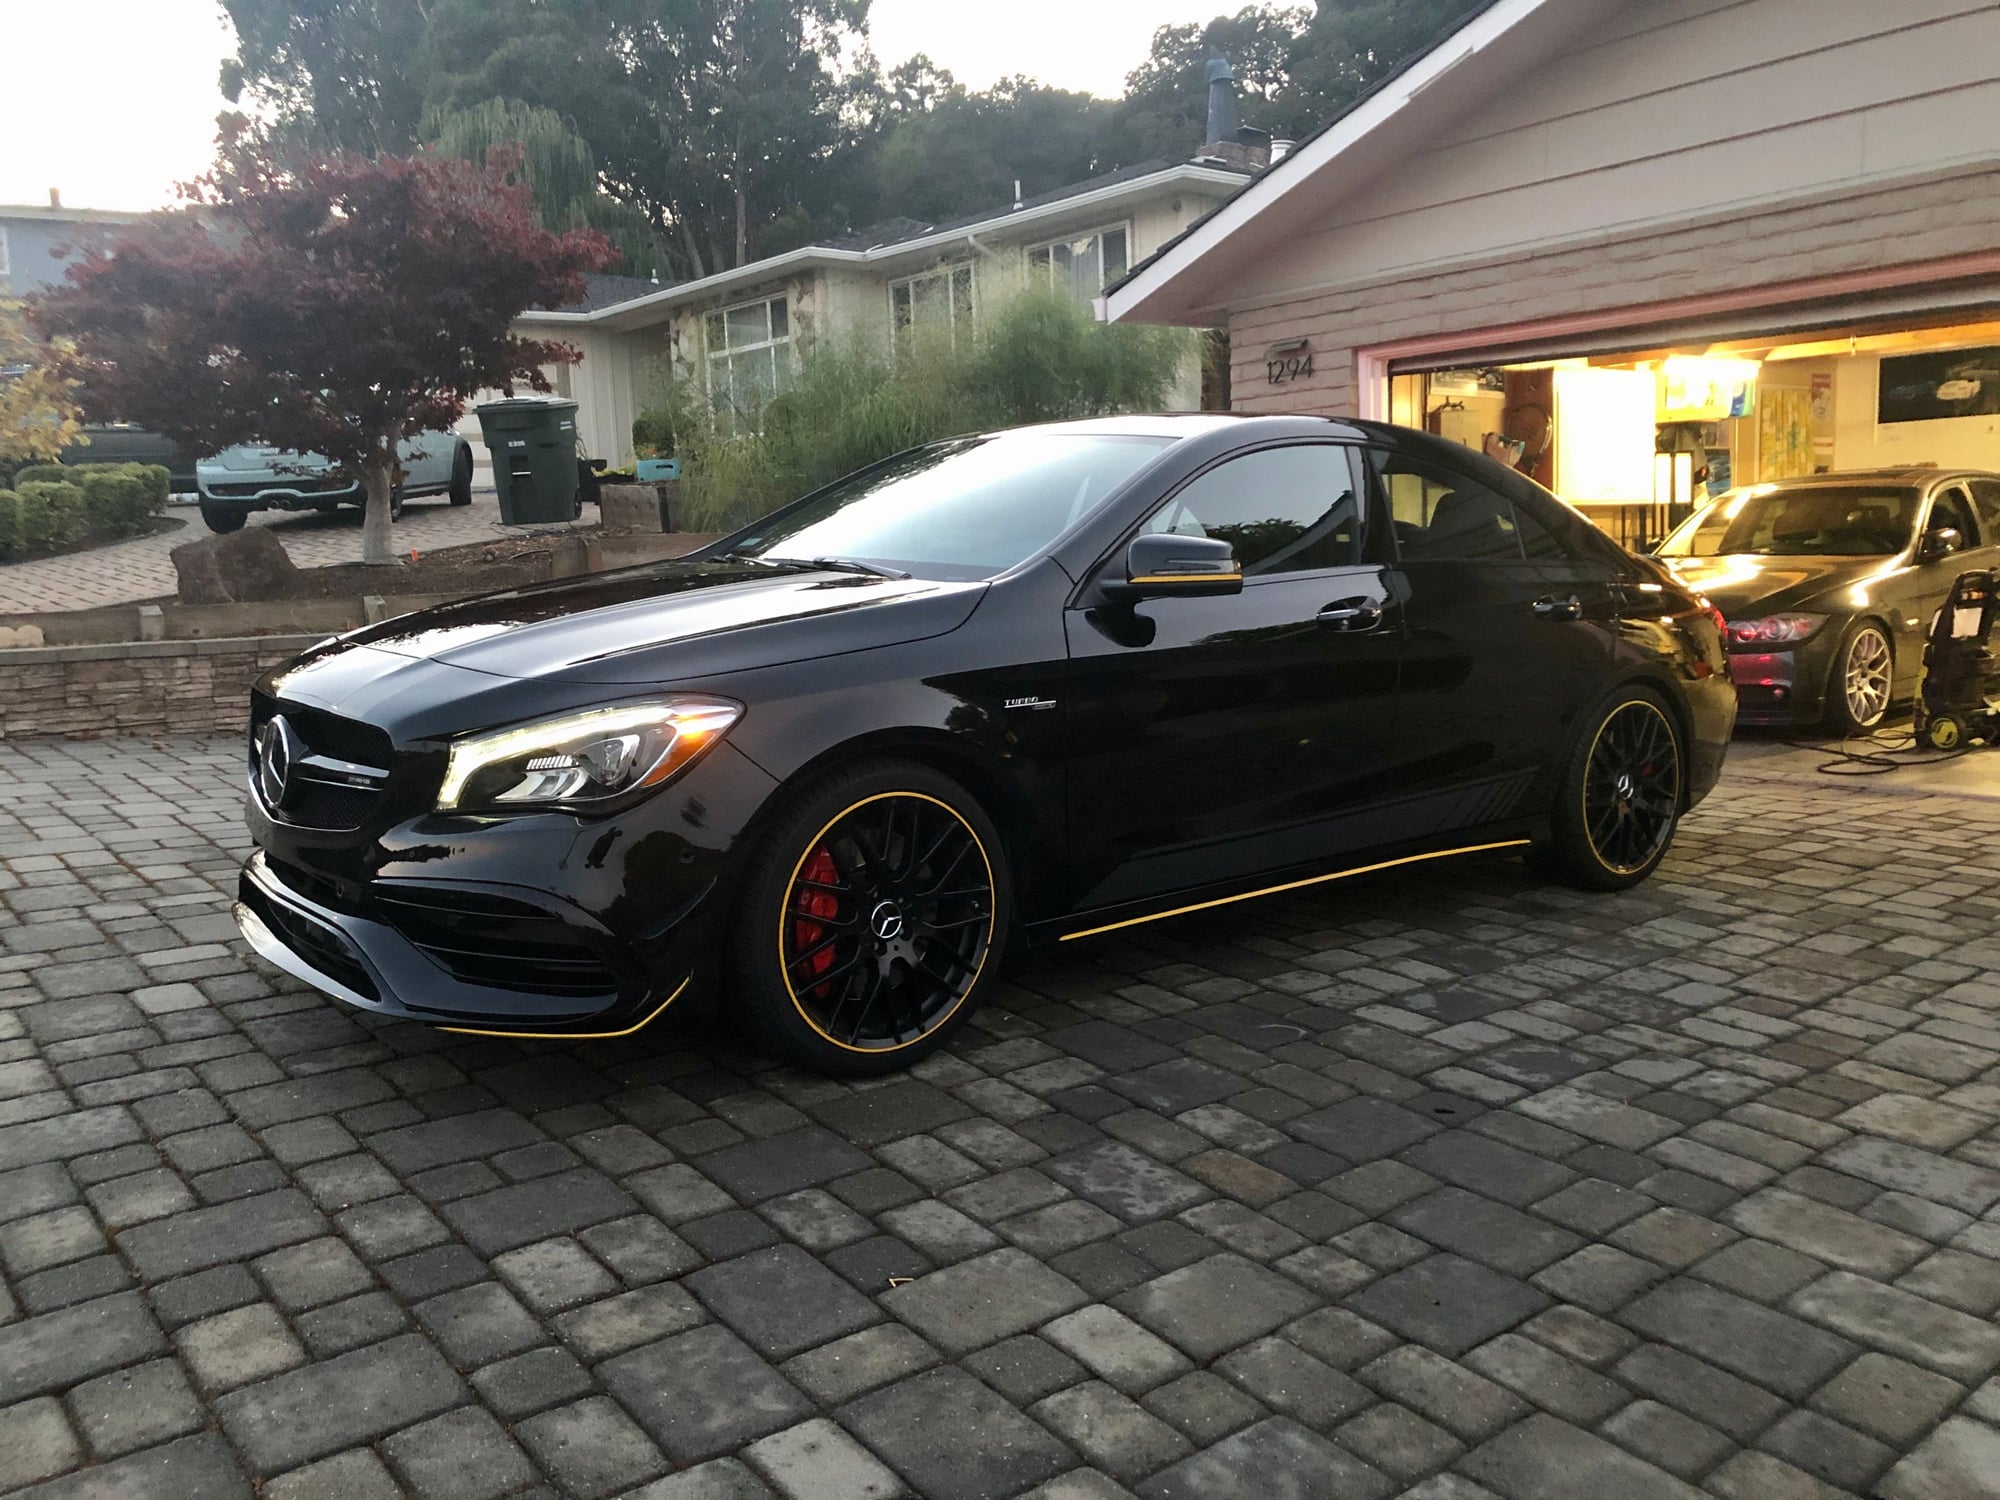 2018 Mercedes-Benz CLA45 AMG - 2018 Mercedes-AMG CLA 45 4MATIC Yellow Night Edition - Used - VIN WDDSJ5CBXJN581145 - 18,300 Miles - 4 cyl - AWD - Automatic - Coupe - Black - San Mateo, CA 94404, United States